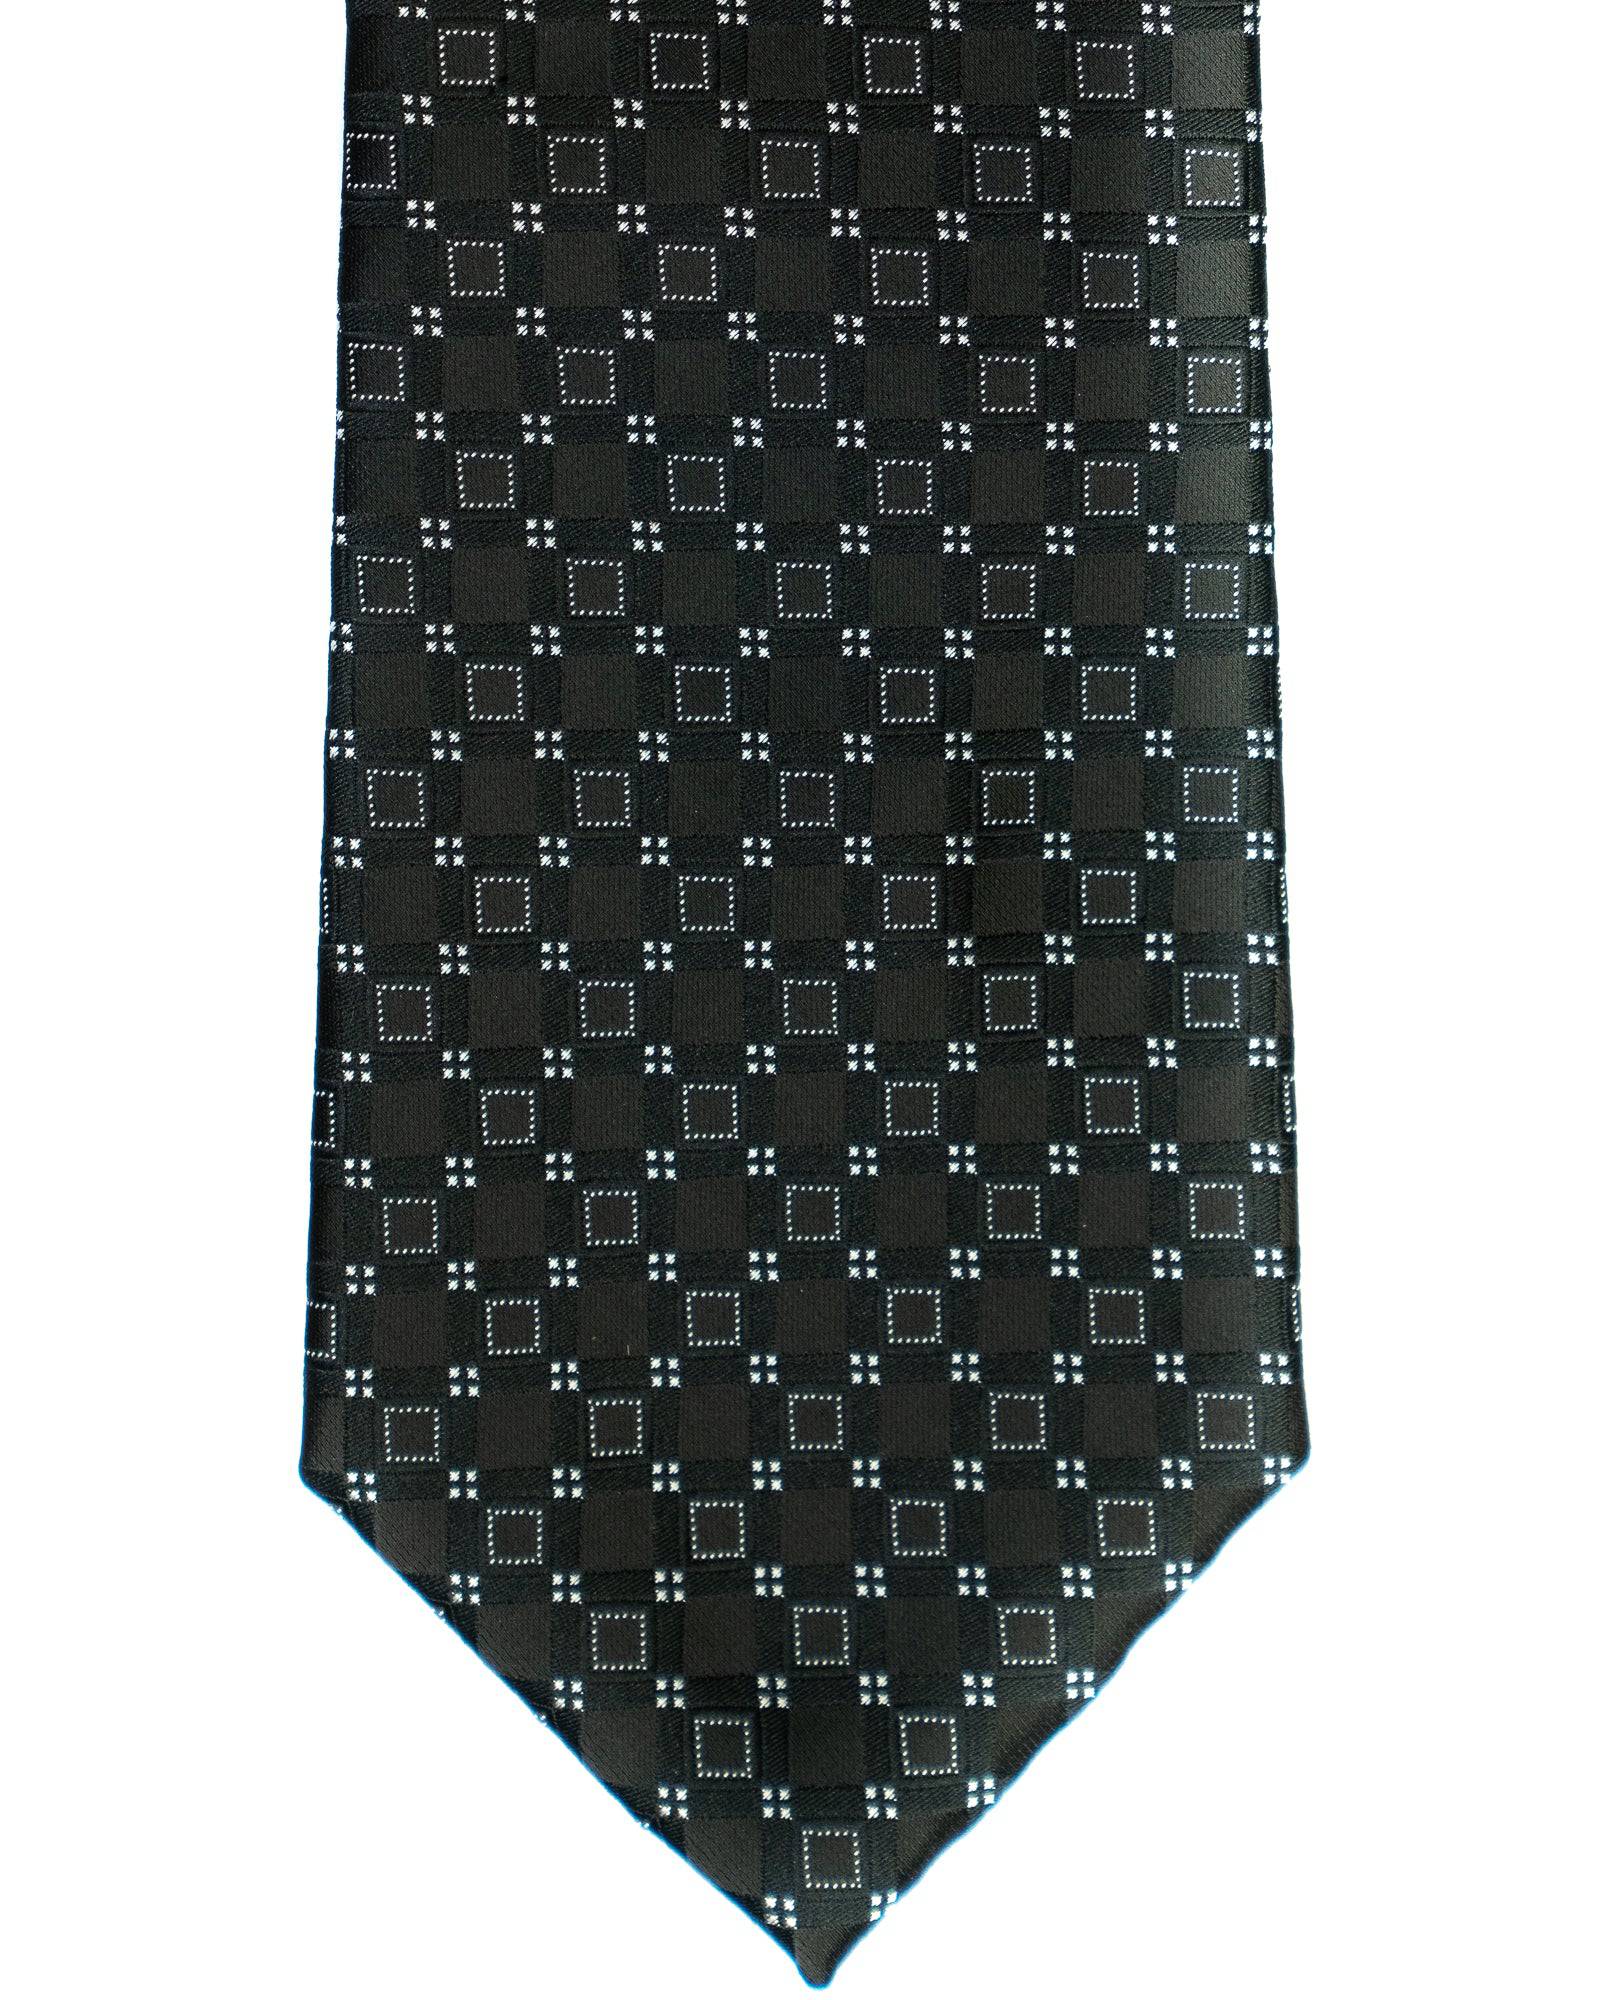 Imani Uomo Square Tie in Black with Silver - Rainwater's Men's Clothing and Tuxedo Rental